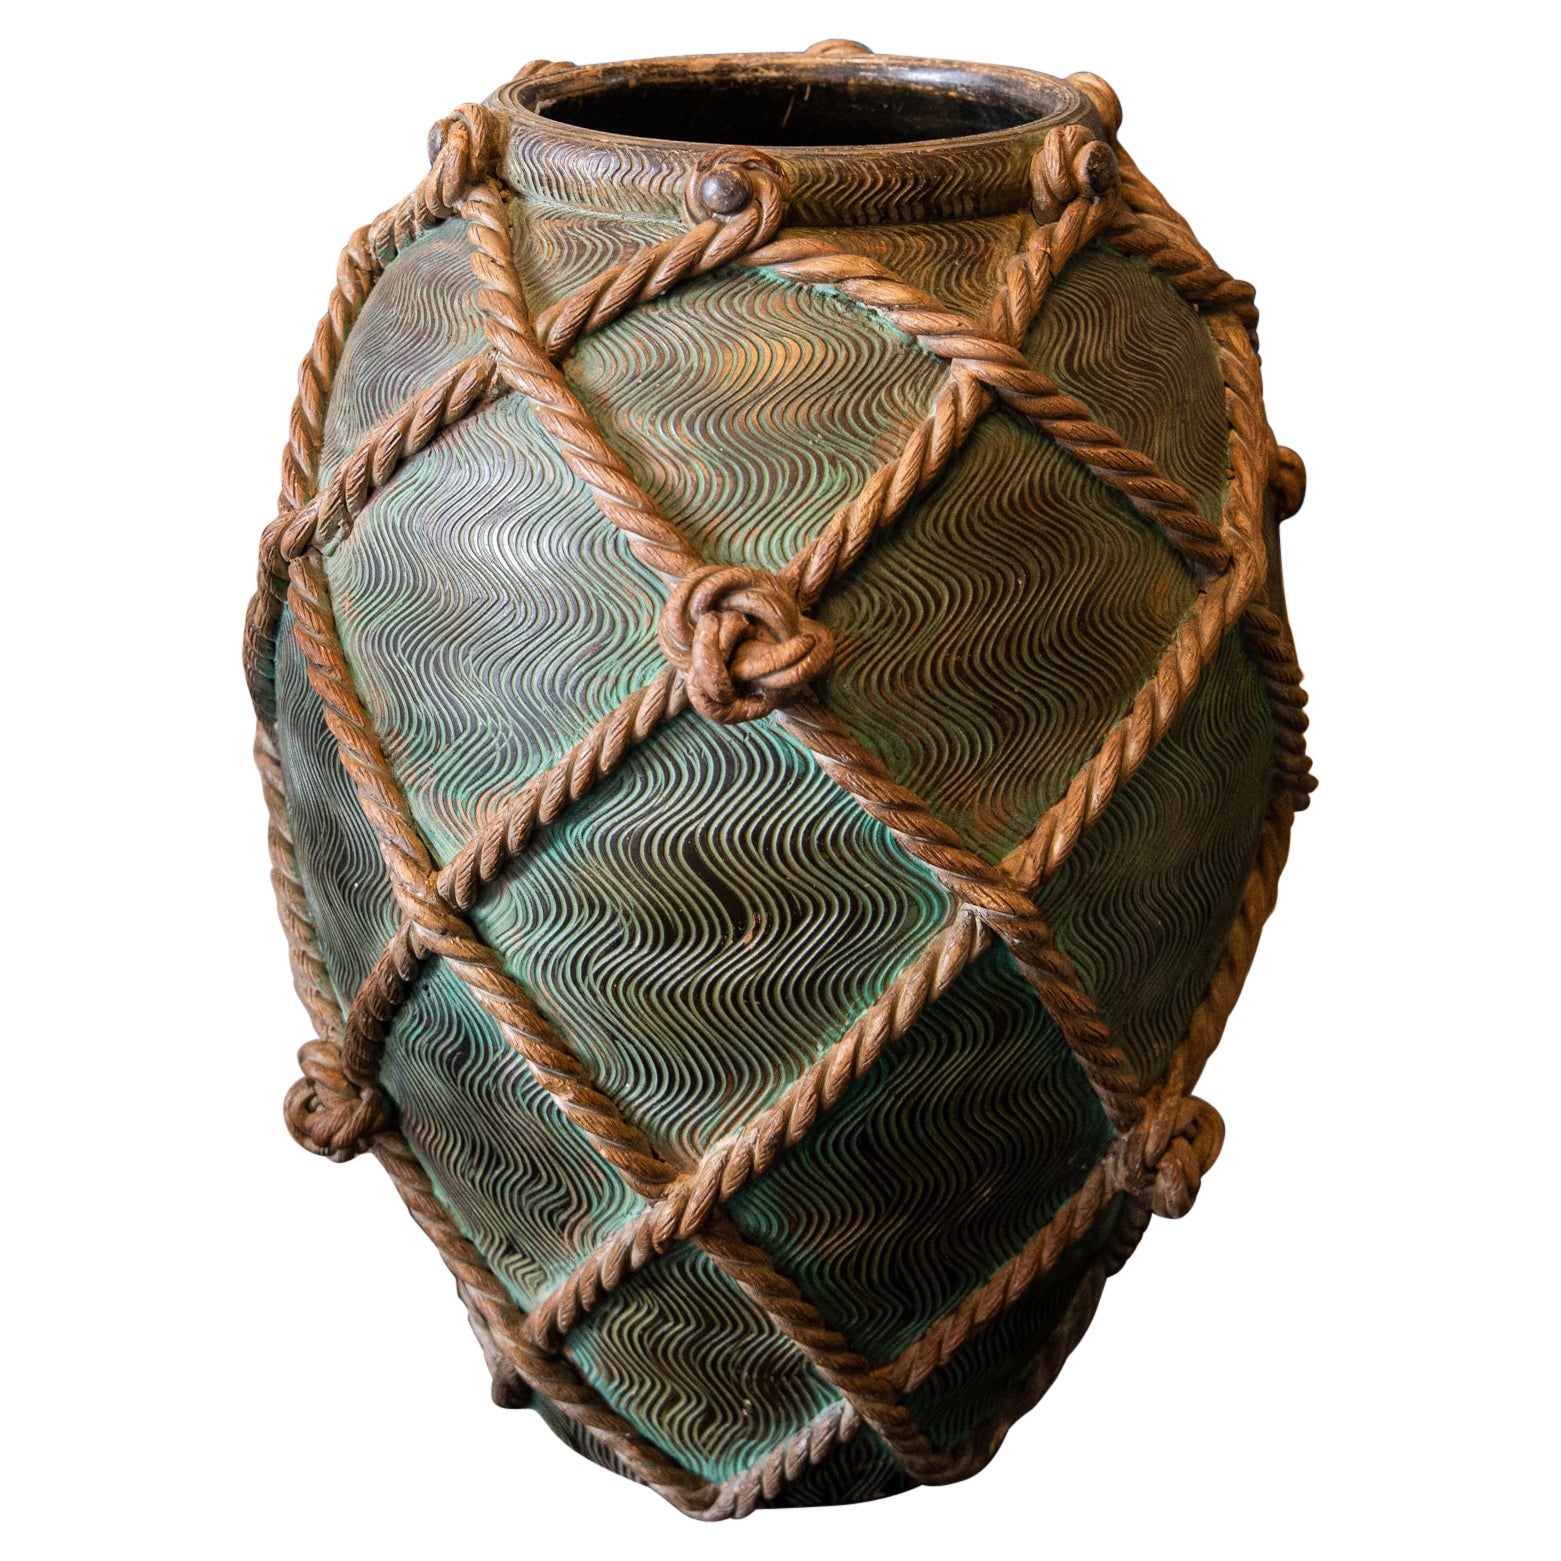 A twisted rope ceramic urn by Ugo Zaccagnini - Firenze 1930s, signed For Sale